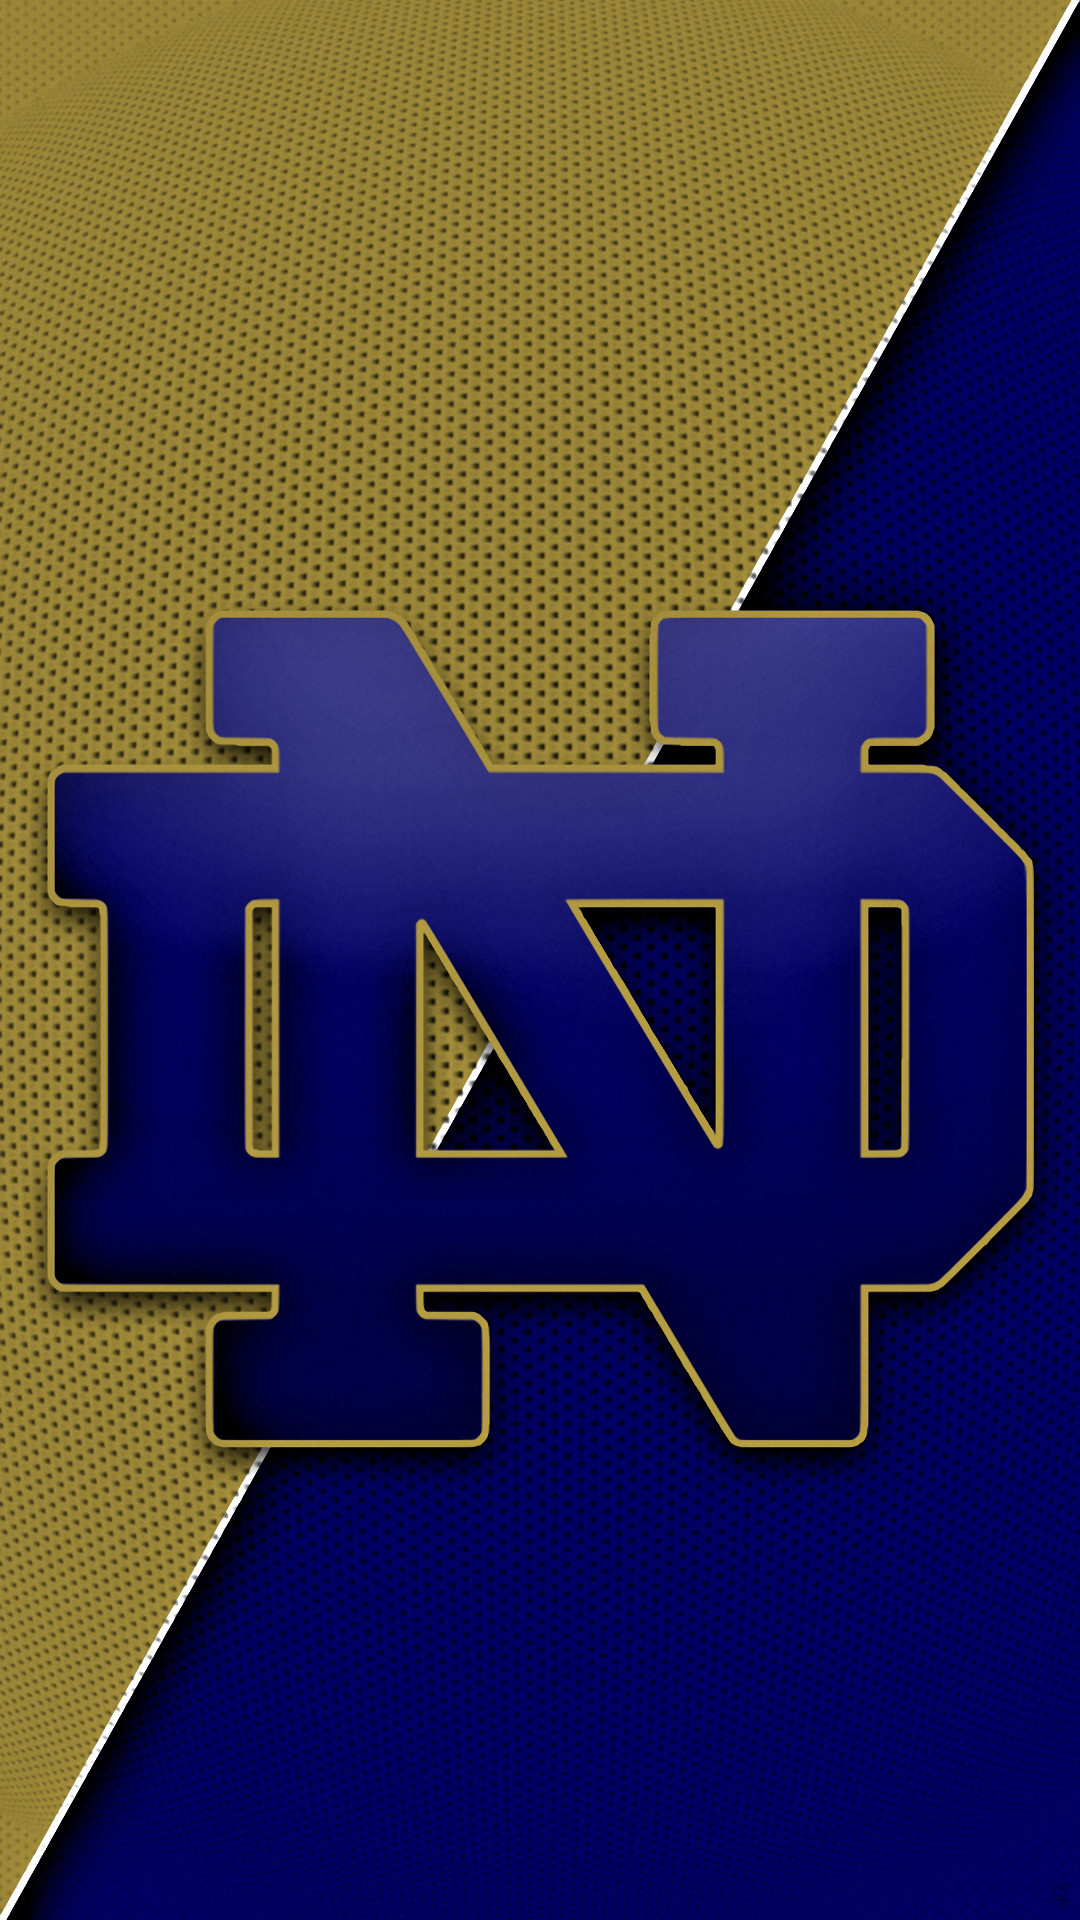 University of Notre Dame HD Wallpapers and Backgrounds